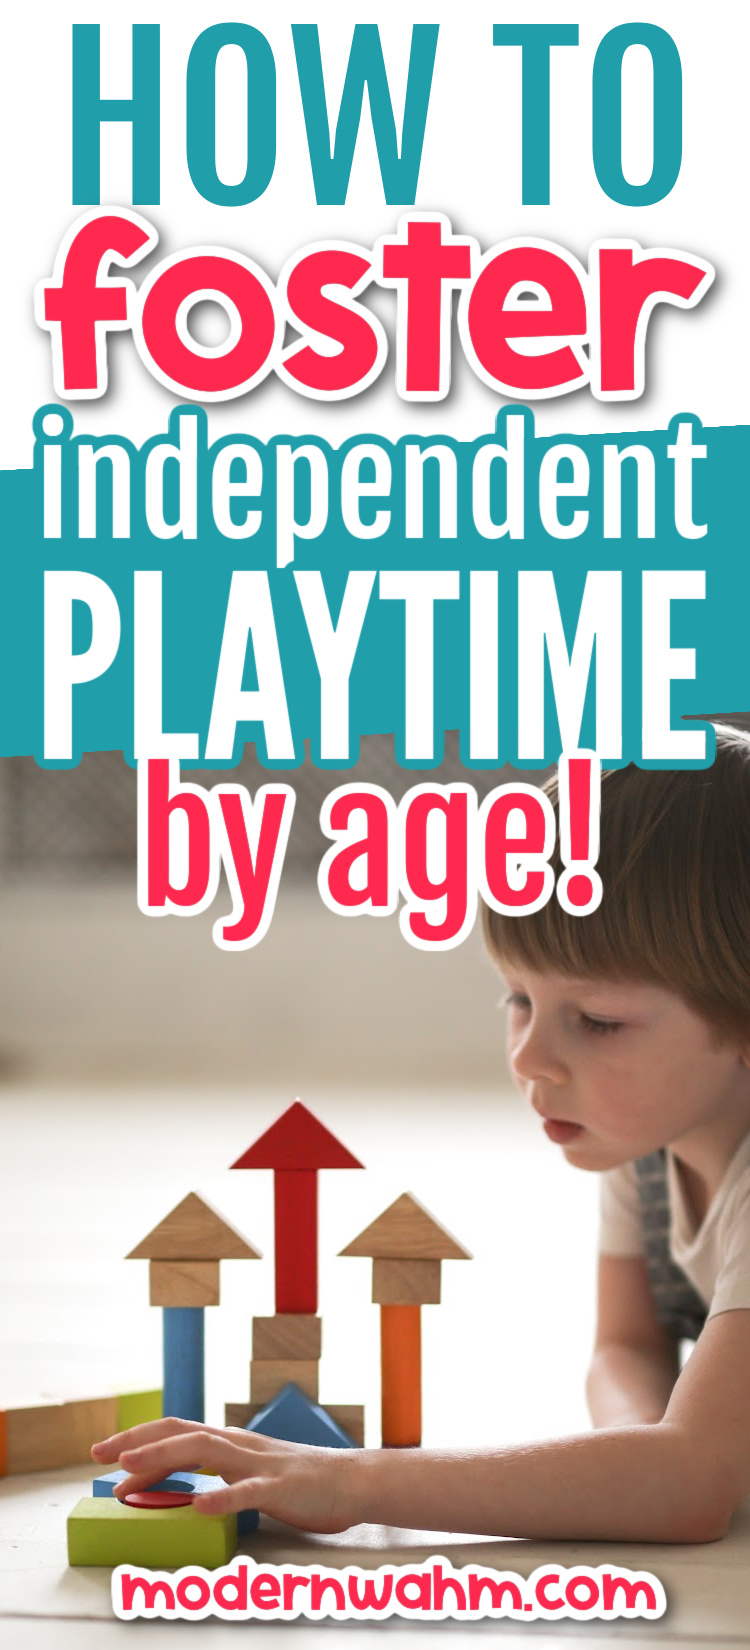 How to foster independent play time by age (Must-Have WAHM survival guide!)